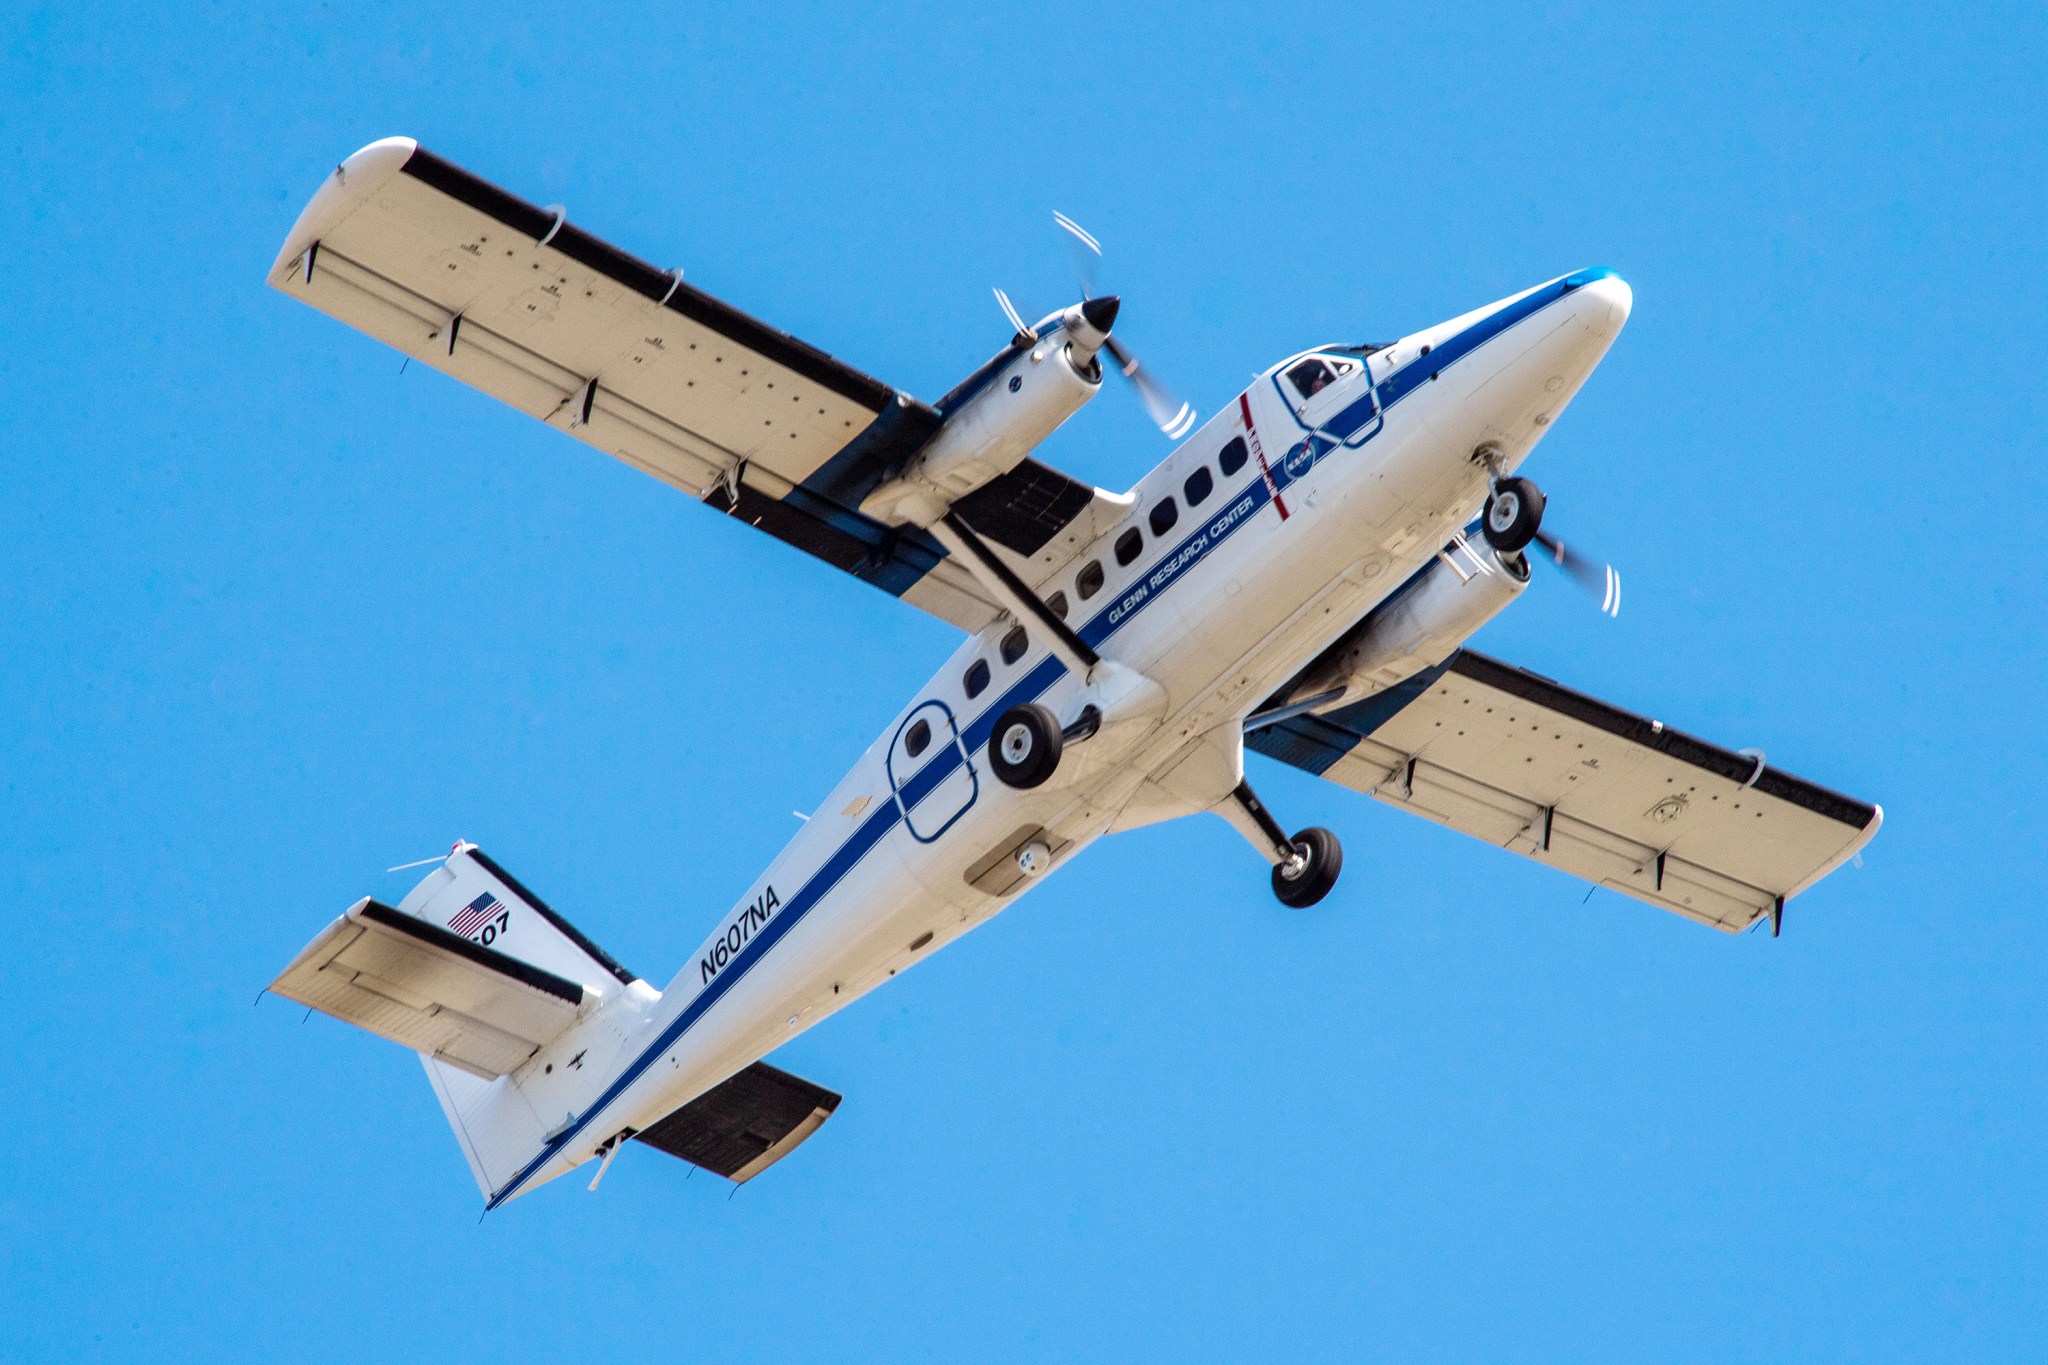 Twin Otter Aircraft in the sky from below.